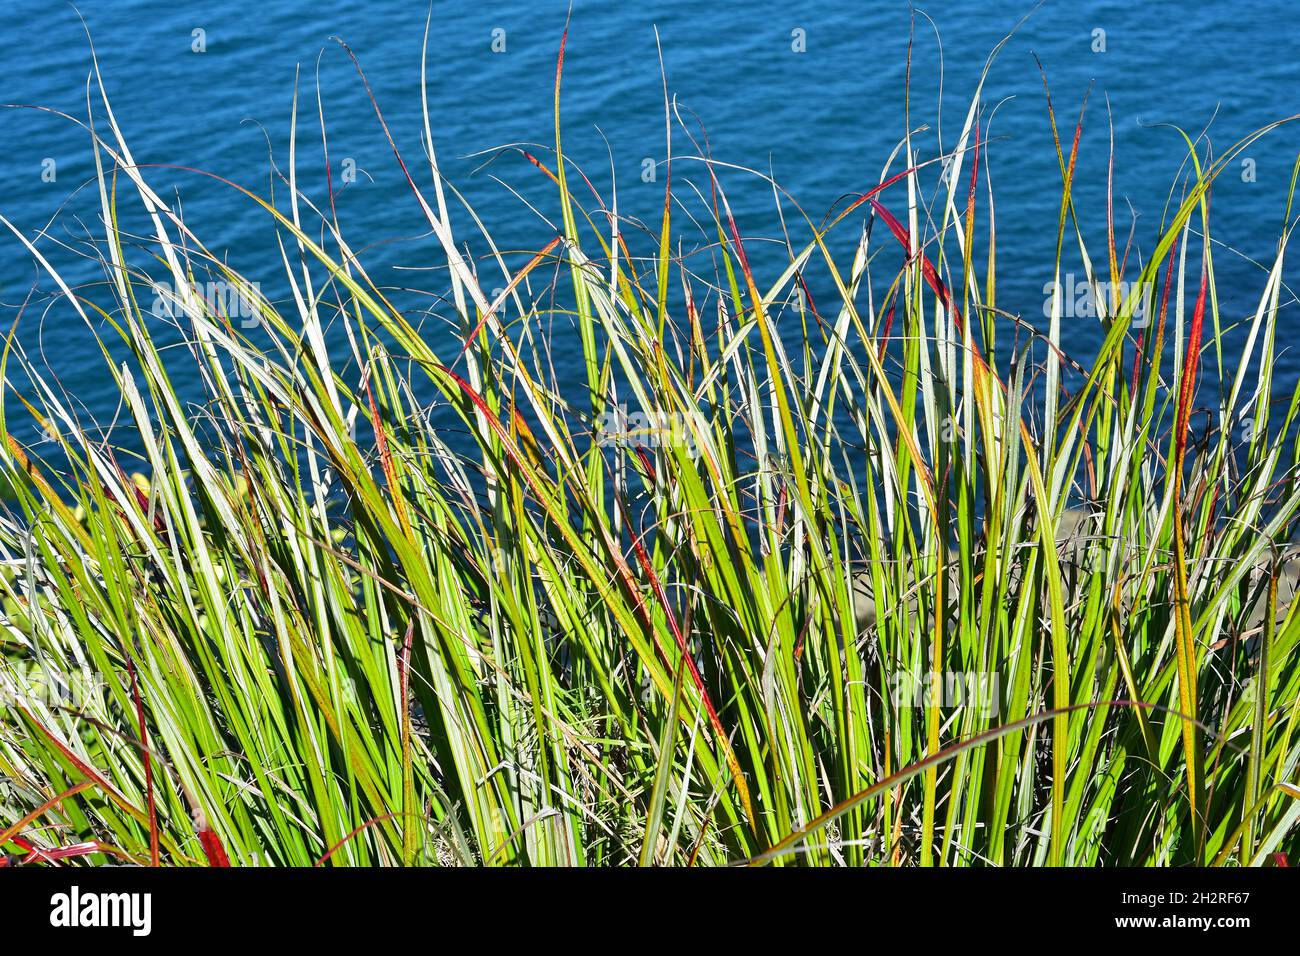 Blades of long grass in harsh sun light with blue sea surface in background. Location: Hauraki Gulf New Zealand Stock Photo